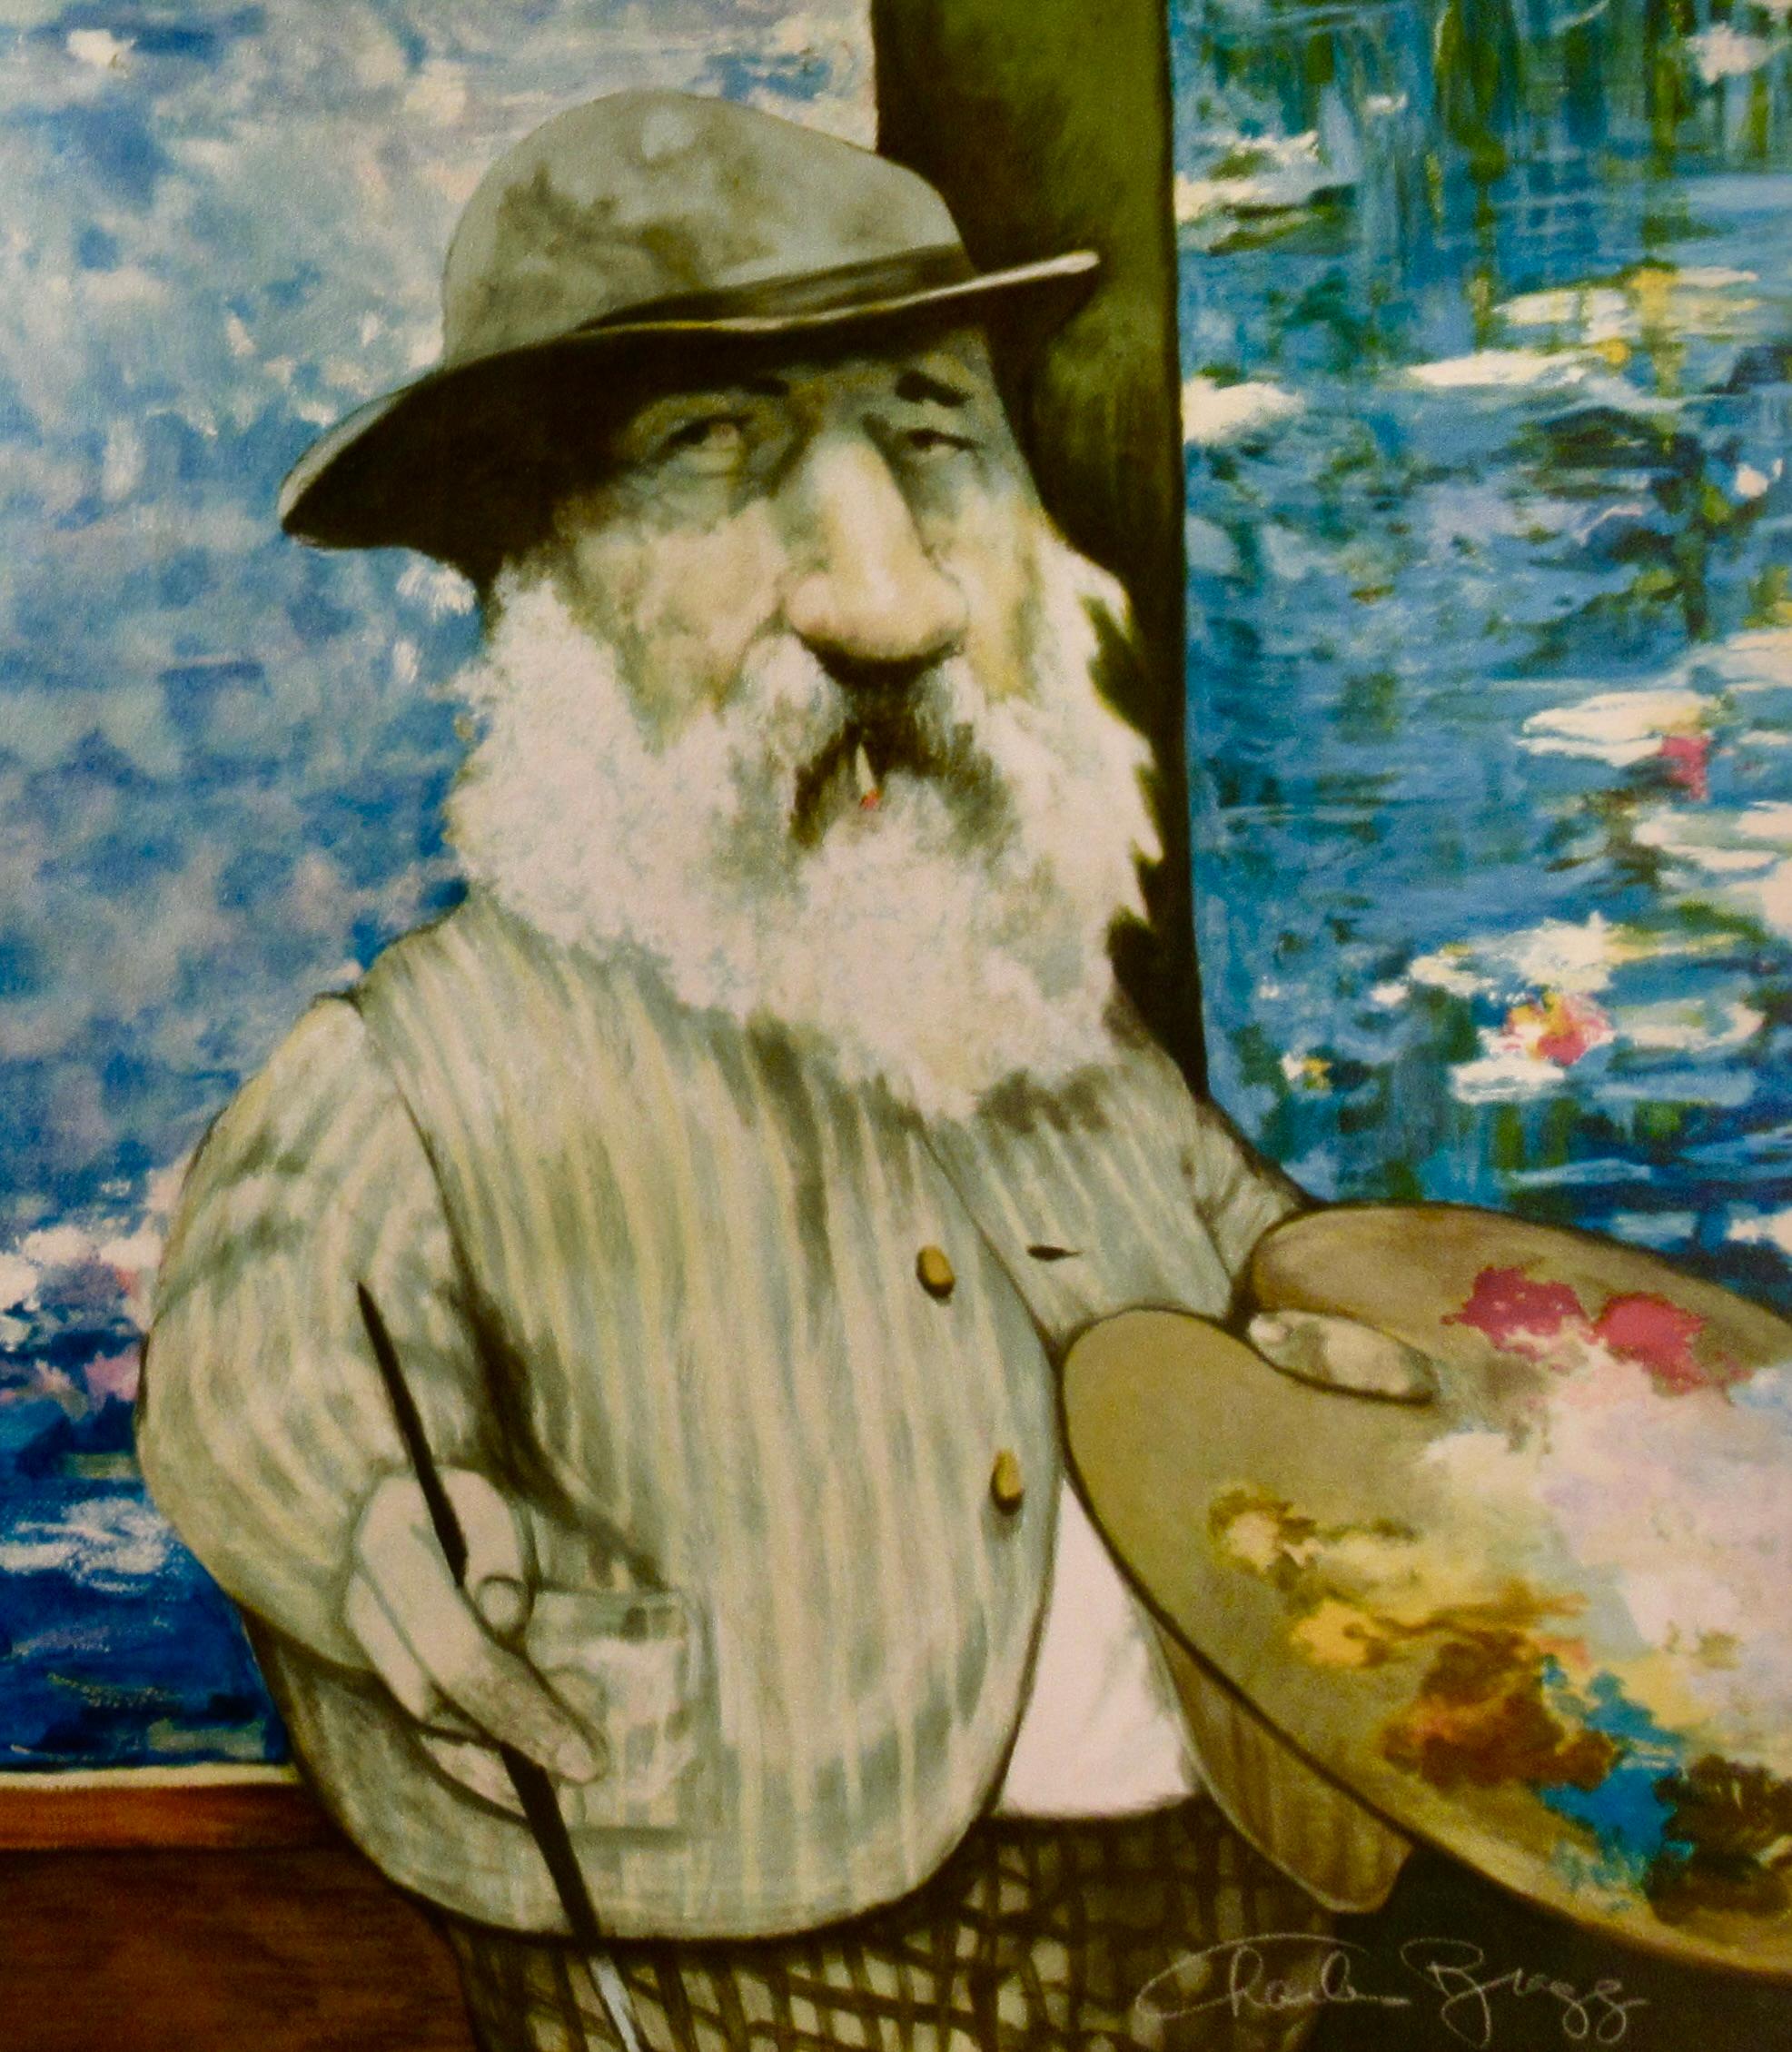 Portrait of Monet - Other Art Style Print by Charles Bragg